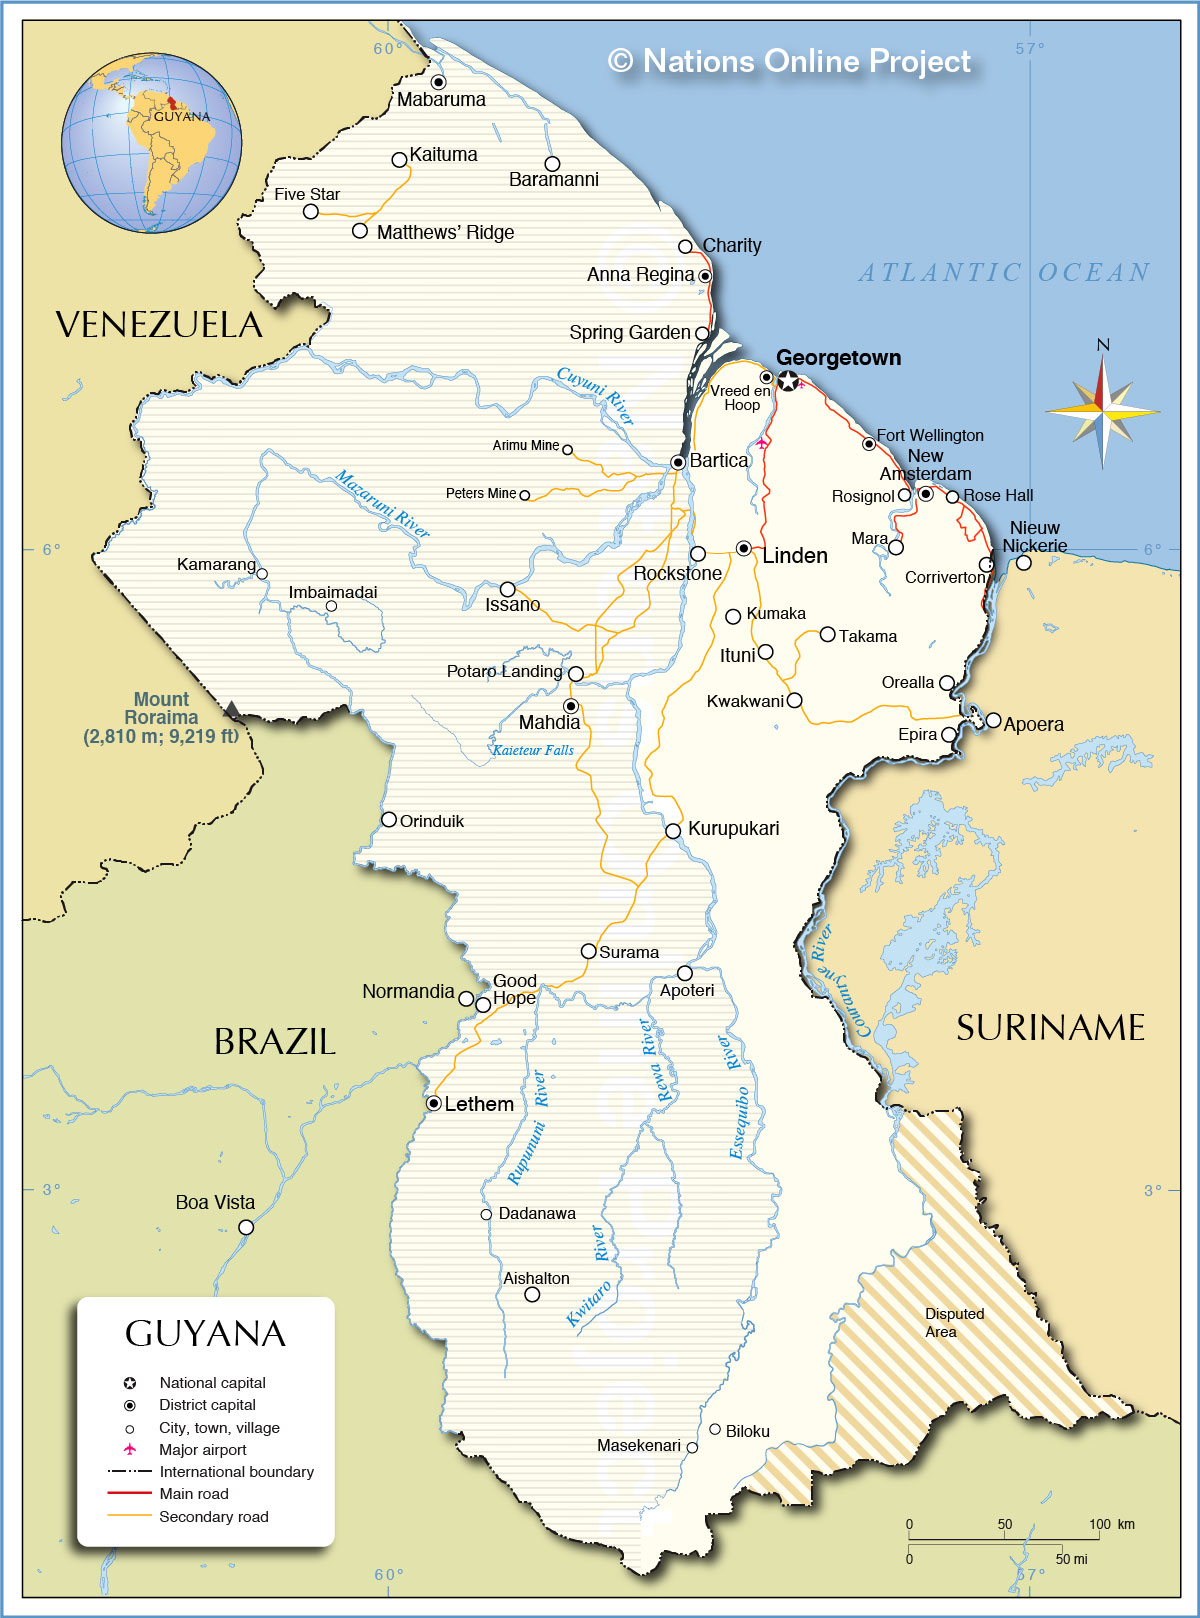 Political Map of Guyana - Nations Online Project